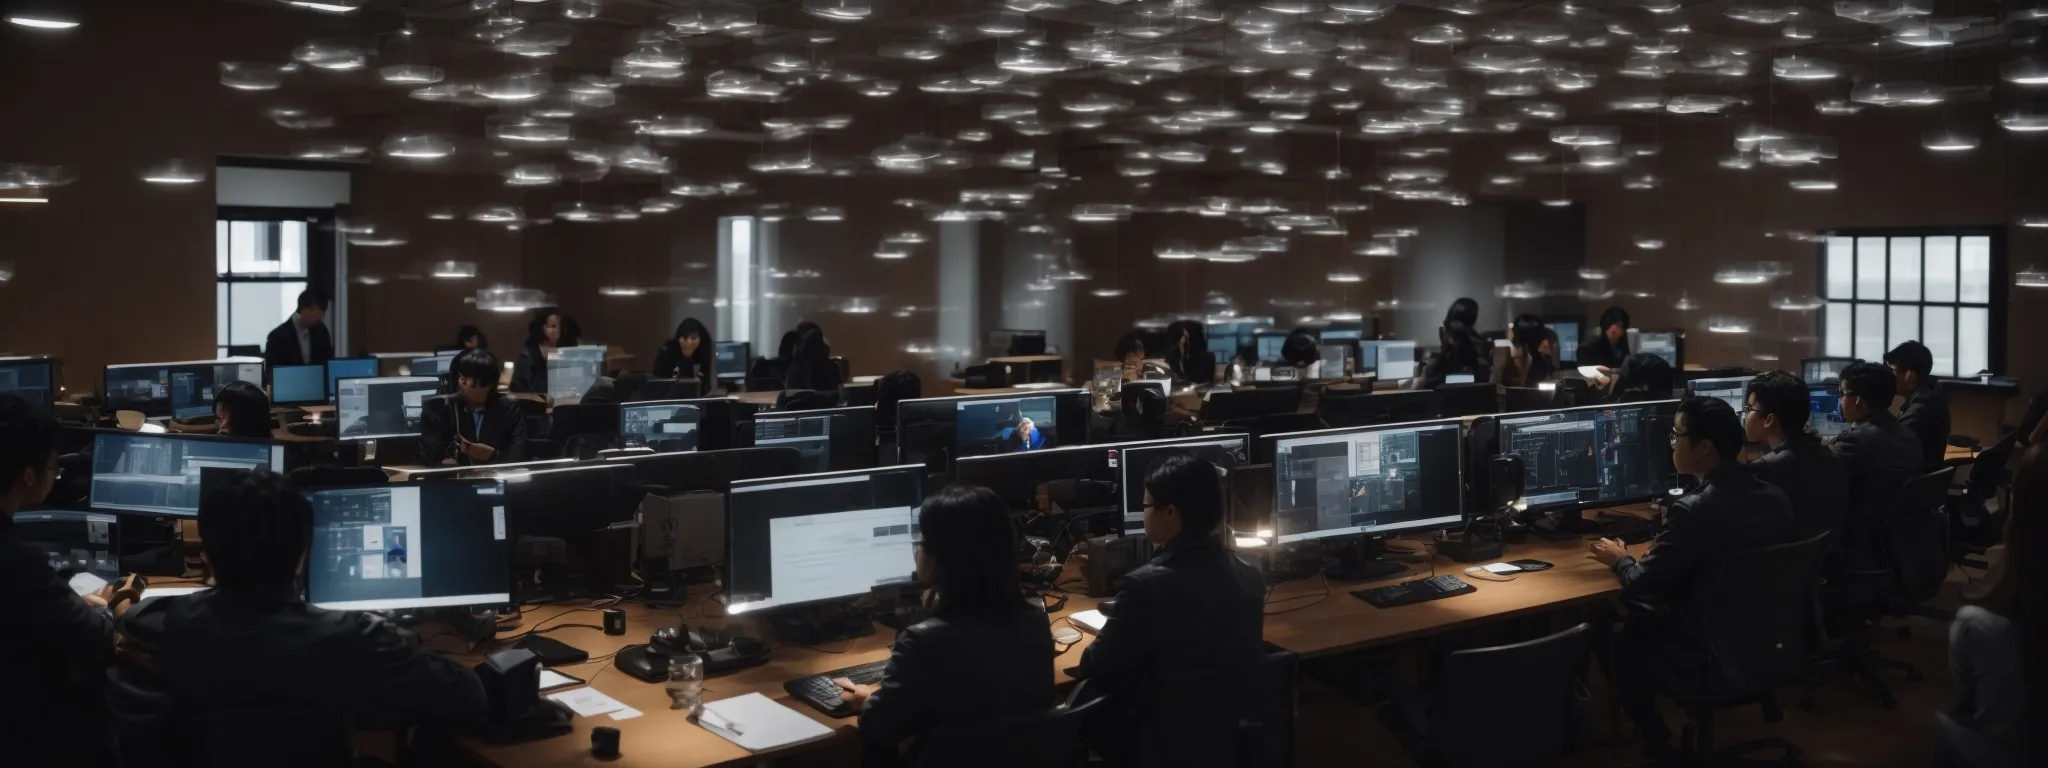 a diverse team engaging in a collaborative session with multiple laptops, symbolically connected through translucent cloud icons hovering above them.